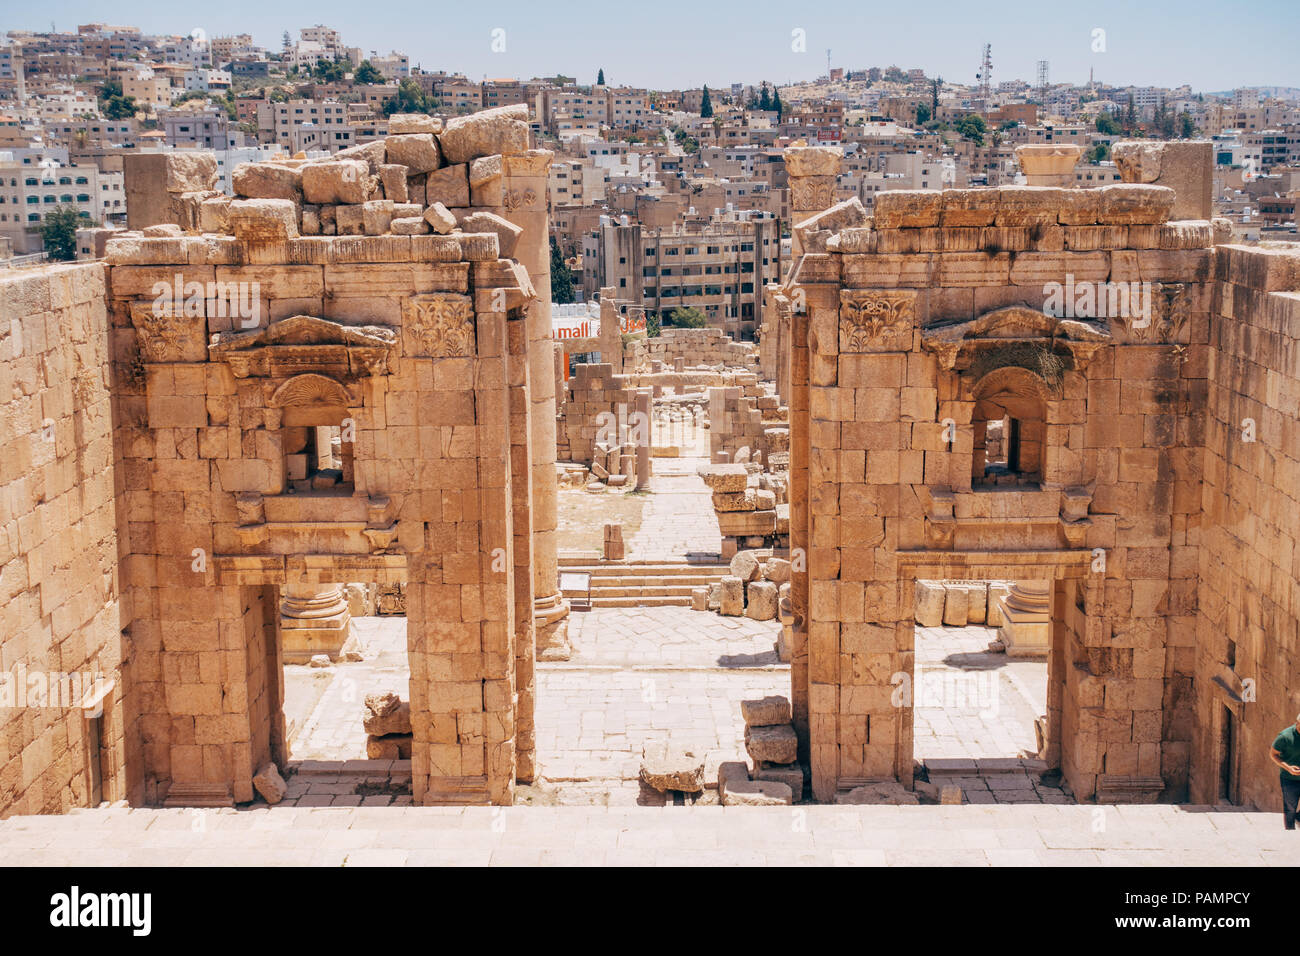 The ruined stones, concrete slabs and pillars in the ancient Mediterranean city of Jerash, Jordan Stock Photo